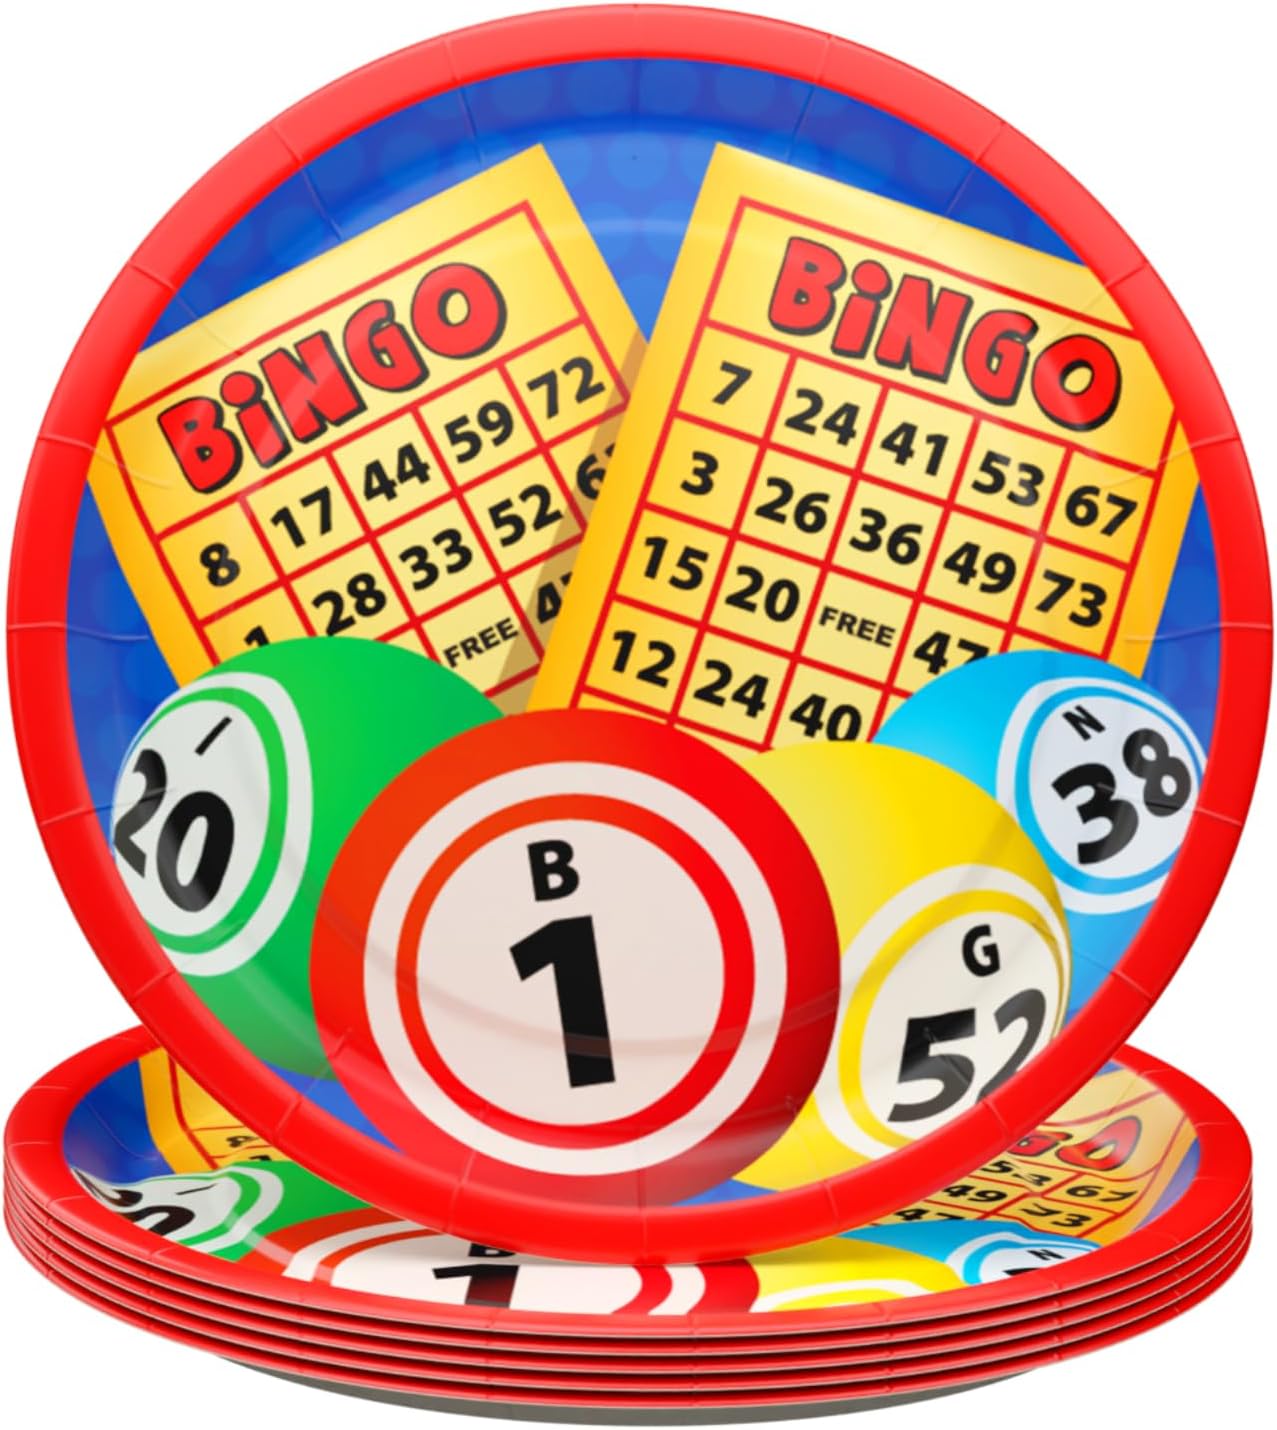 Bingo Dinner Plates with vibrant illustrations of bingo balls and cards, perfect for adding a playful and exciting touch to your table setting or bingo-themed events.